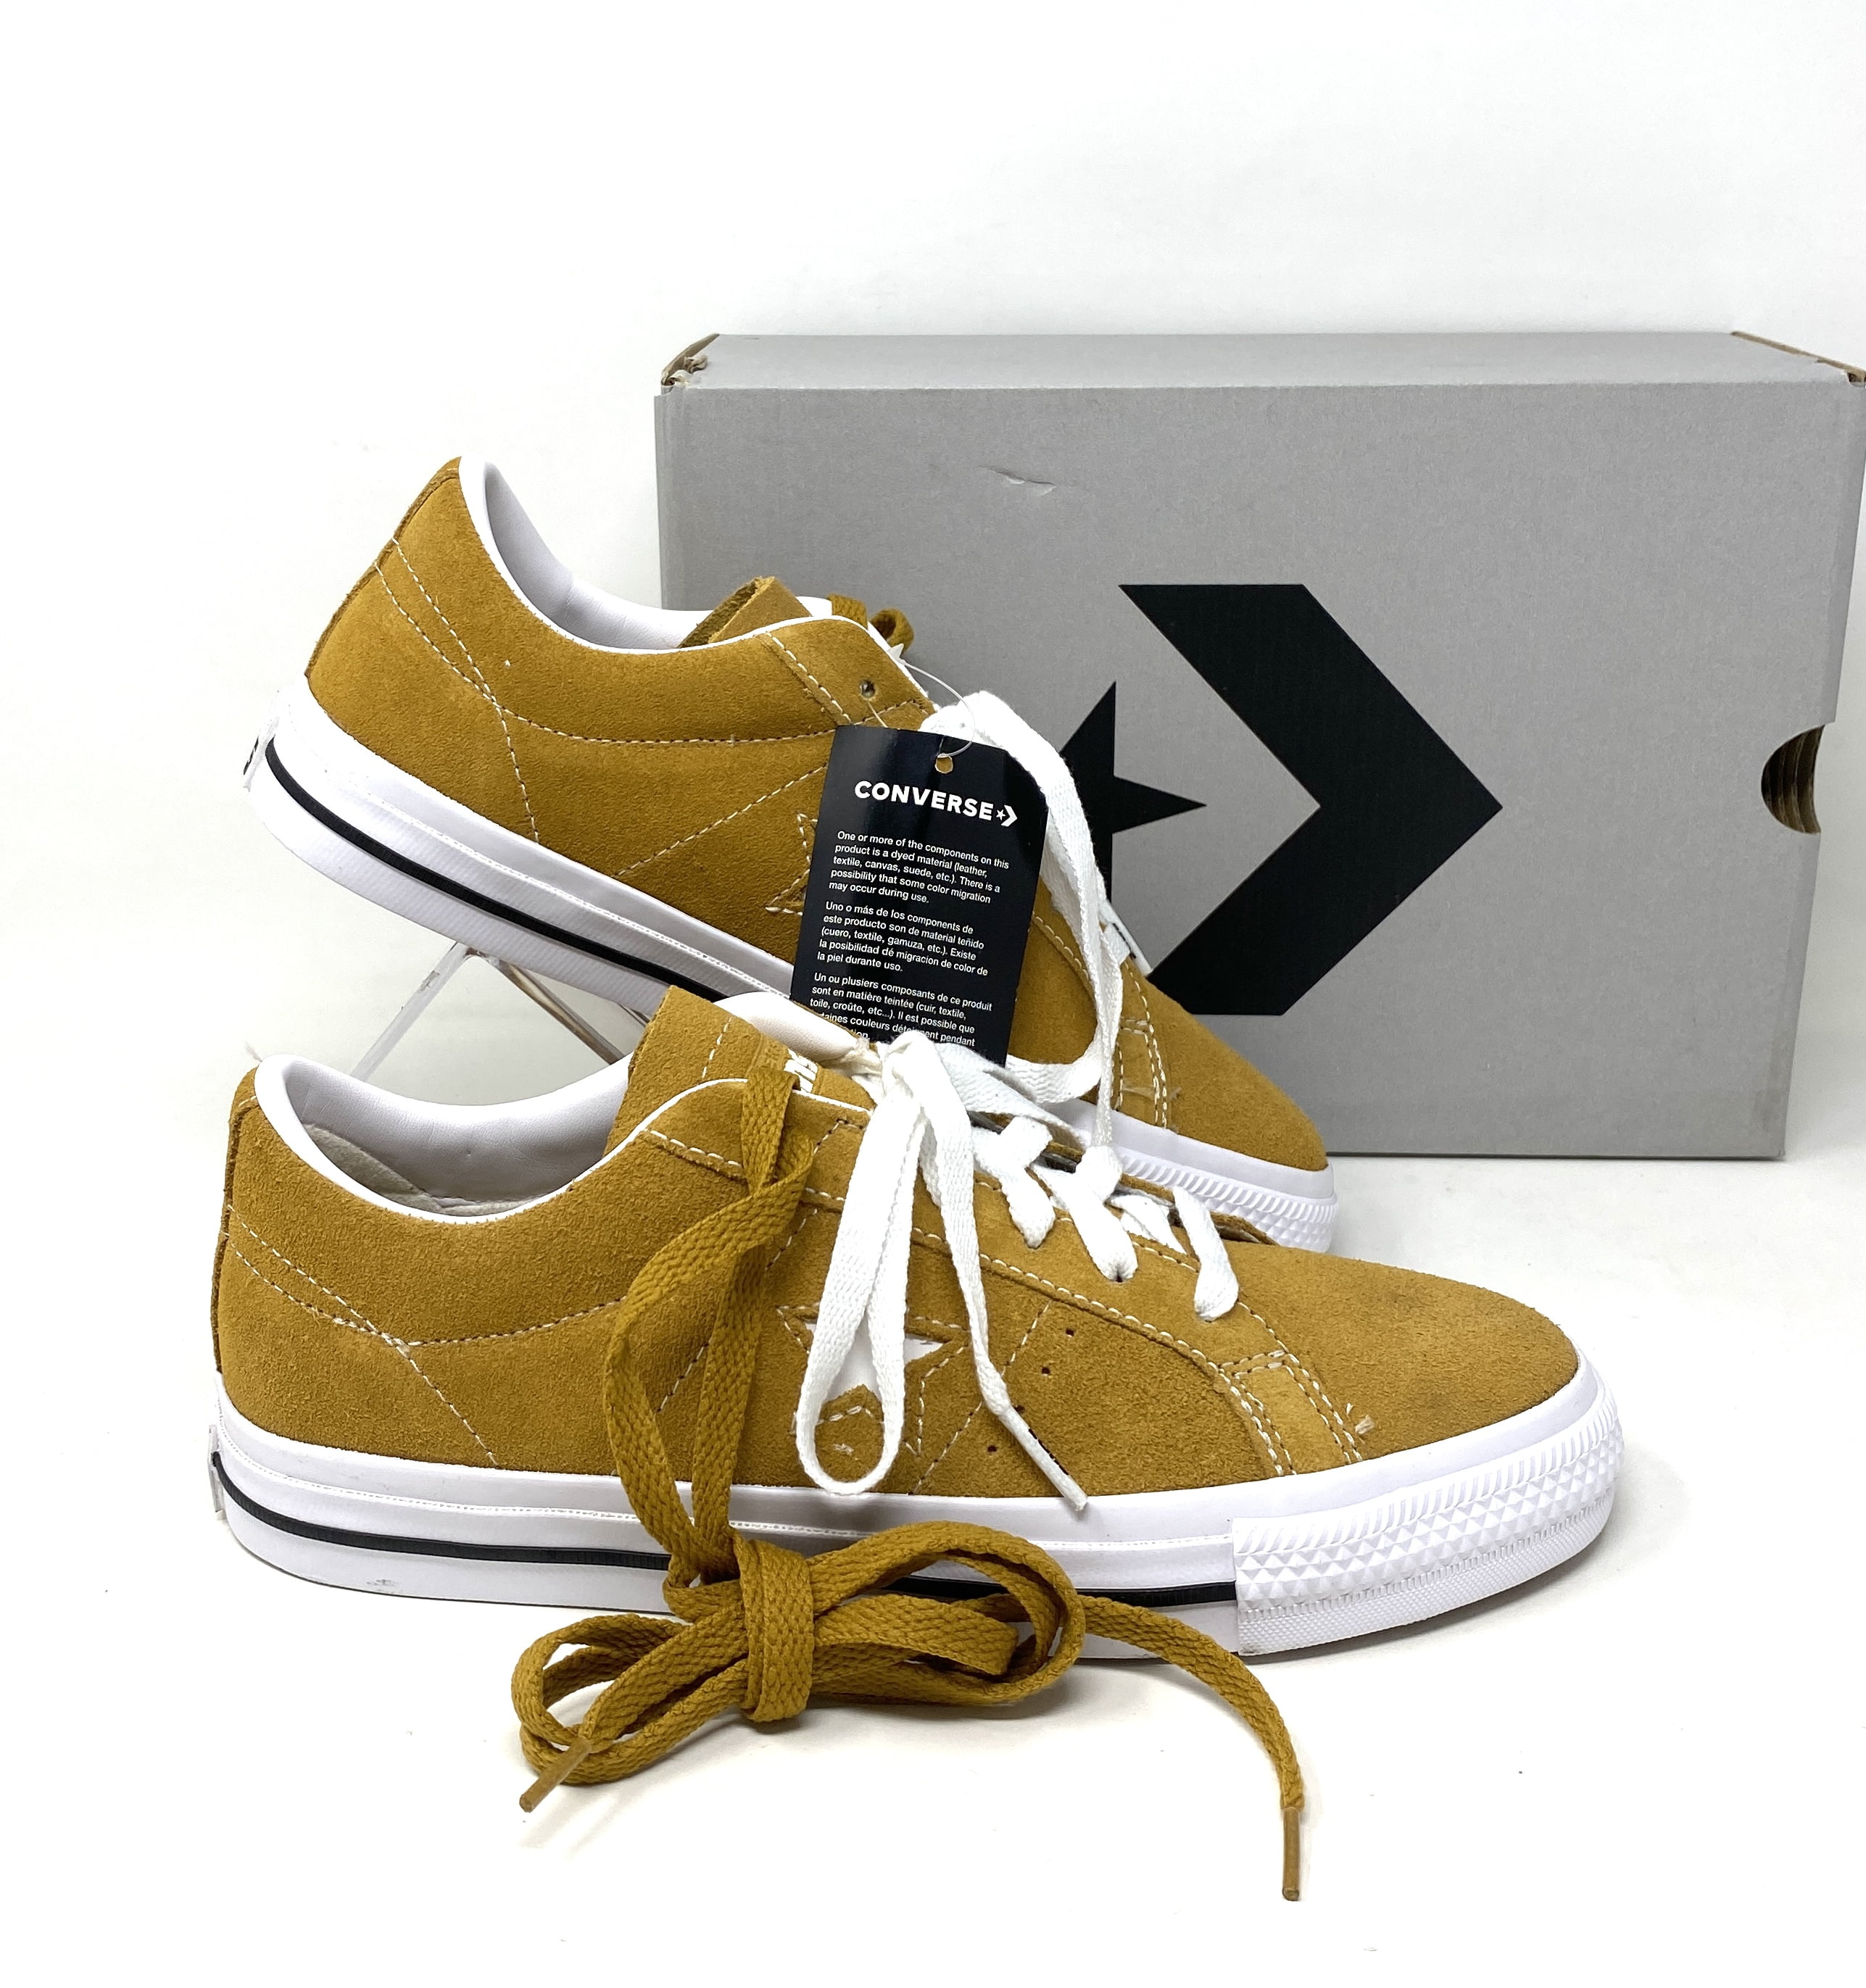 Converse One Star Pro OX All Star Low Top Wheat Women's Size Sneakers 171979C - Walmart.com